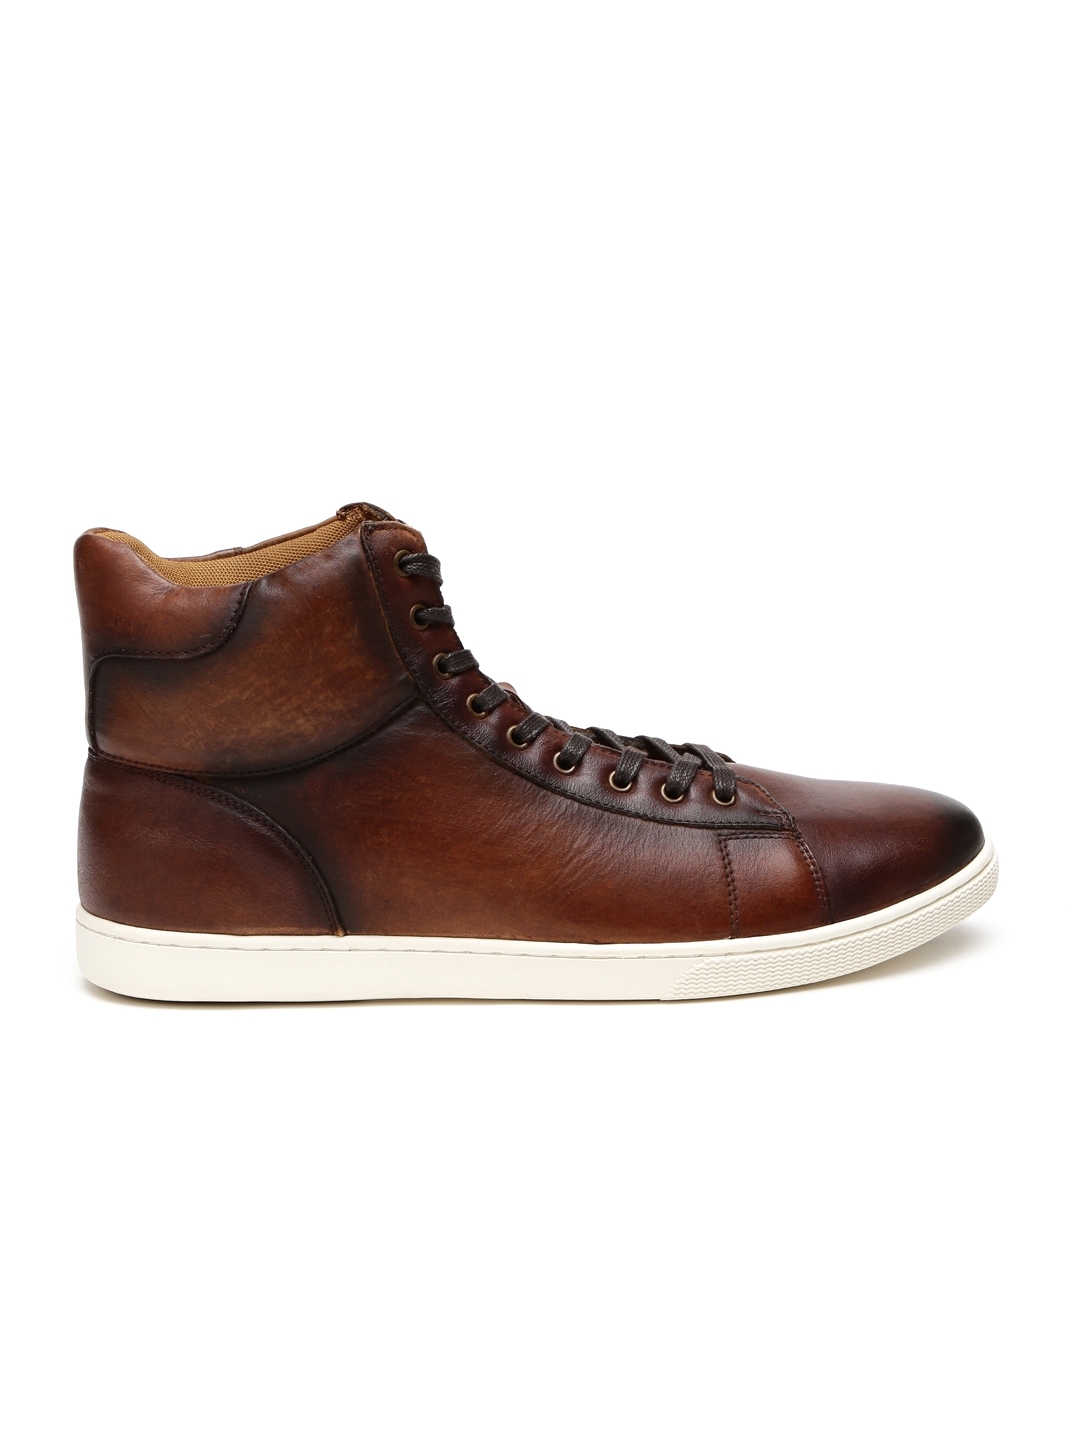 Buy Steve Madden Men Brown Solid High Tops Sneakers - Casual Shoes for ...